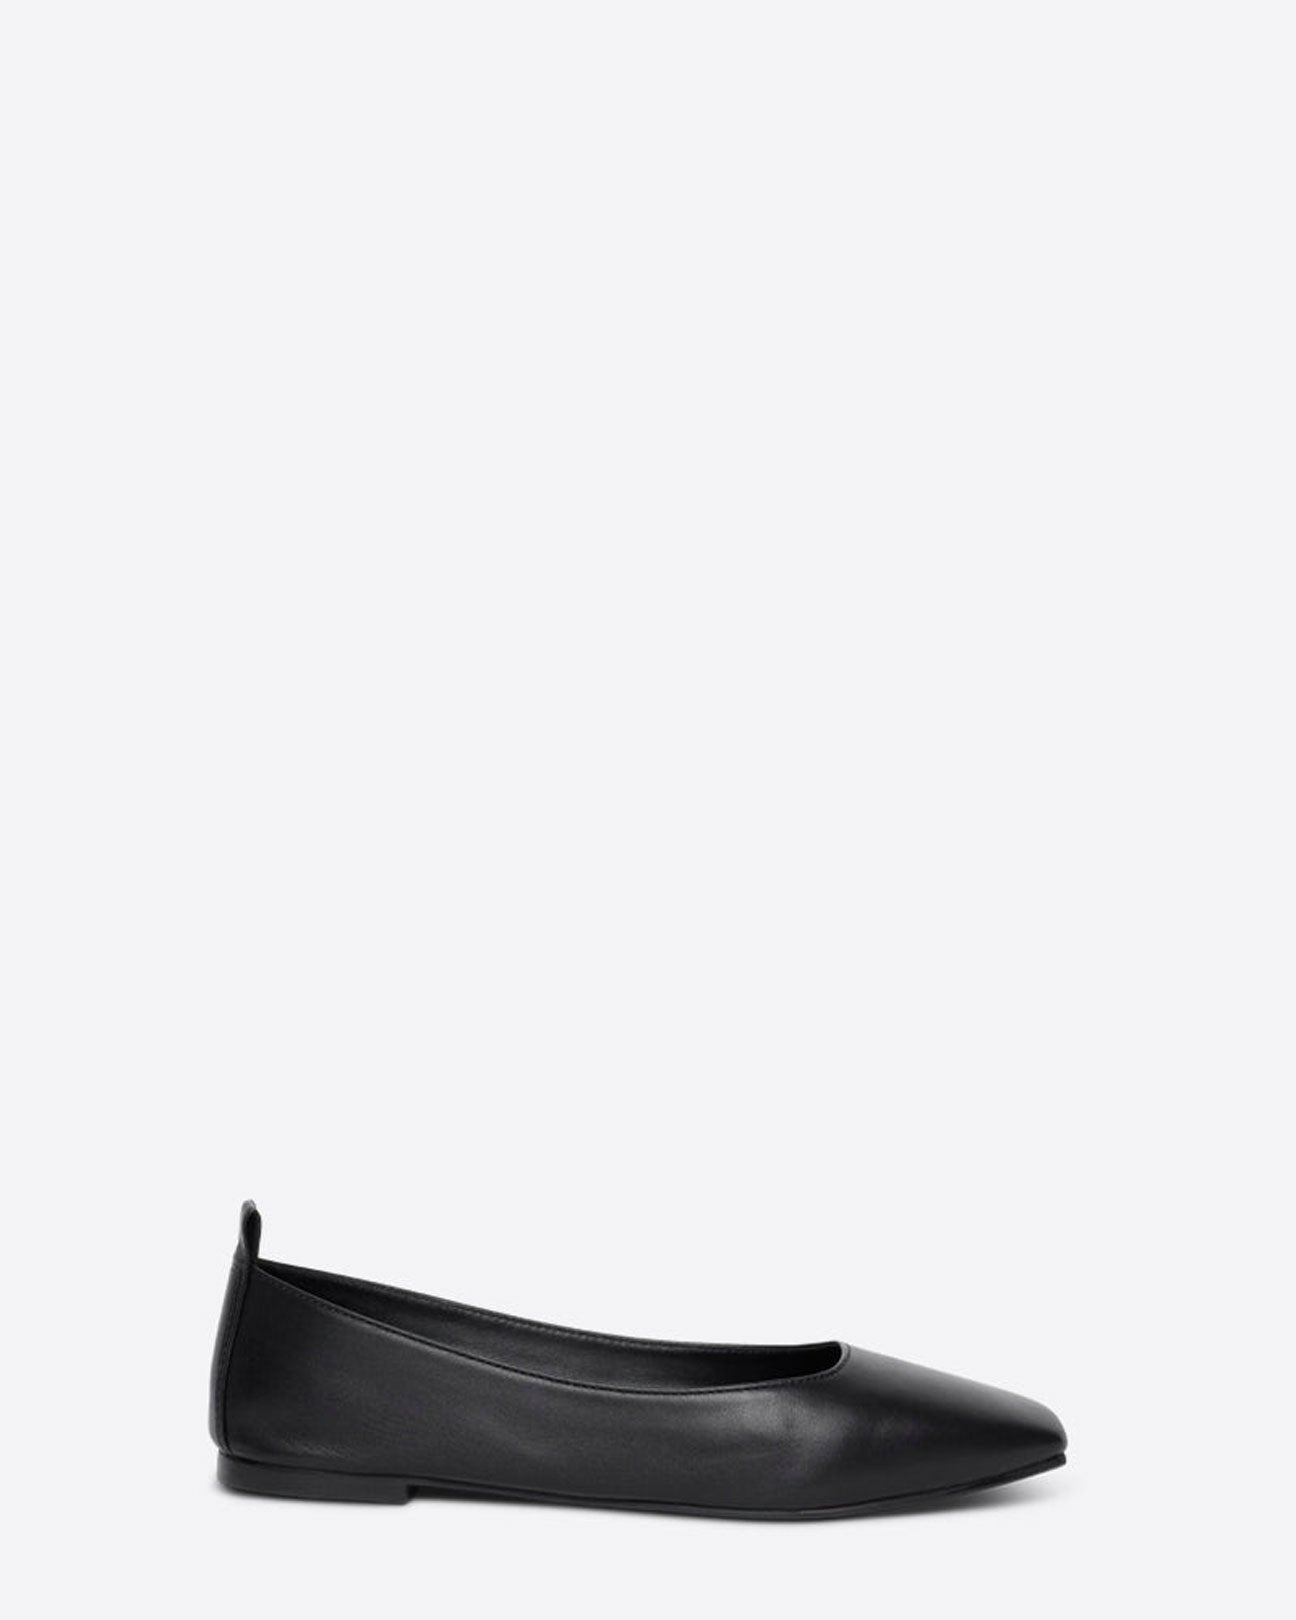 INTENTIONALLY BLANK Image Natural Sole Flat in Black available at Lahn.shop